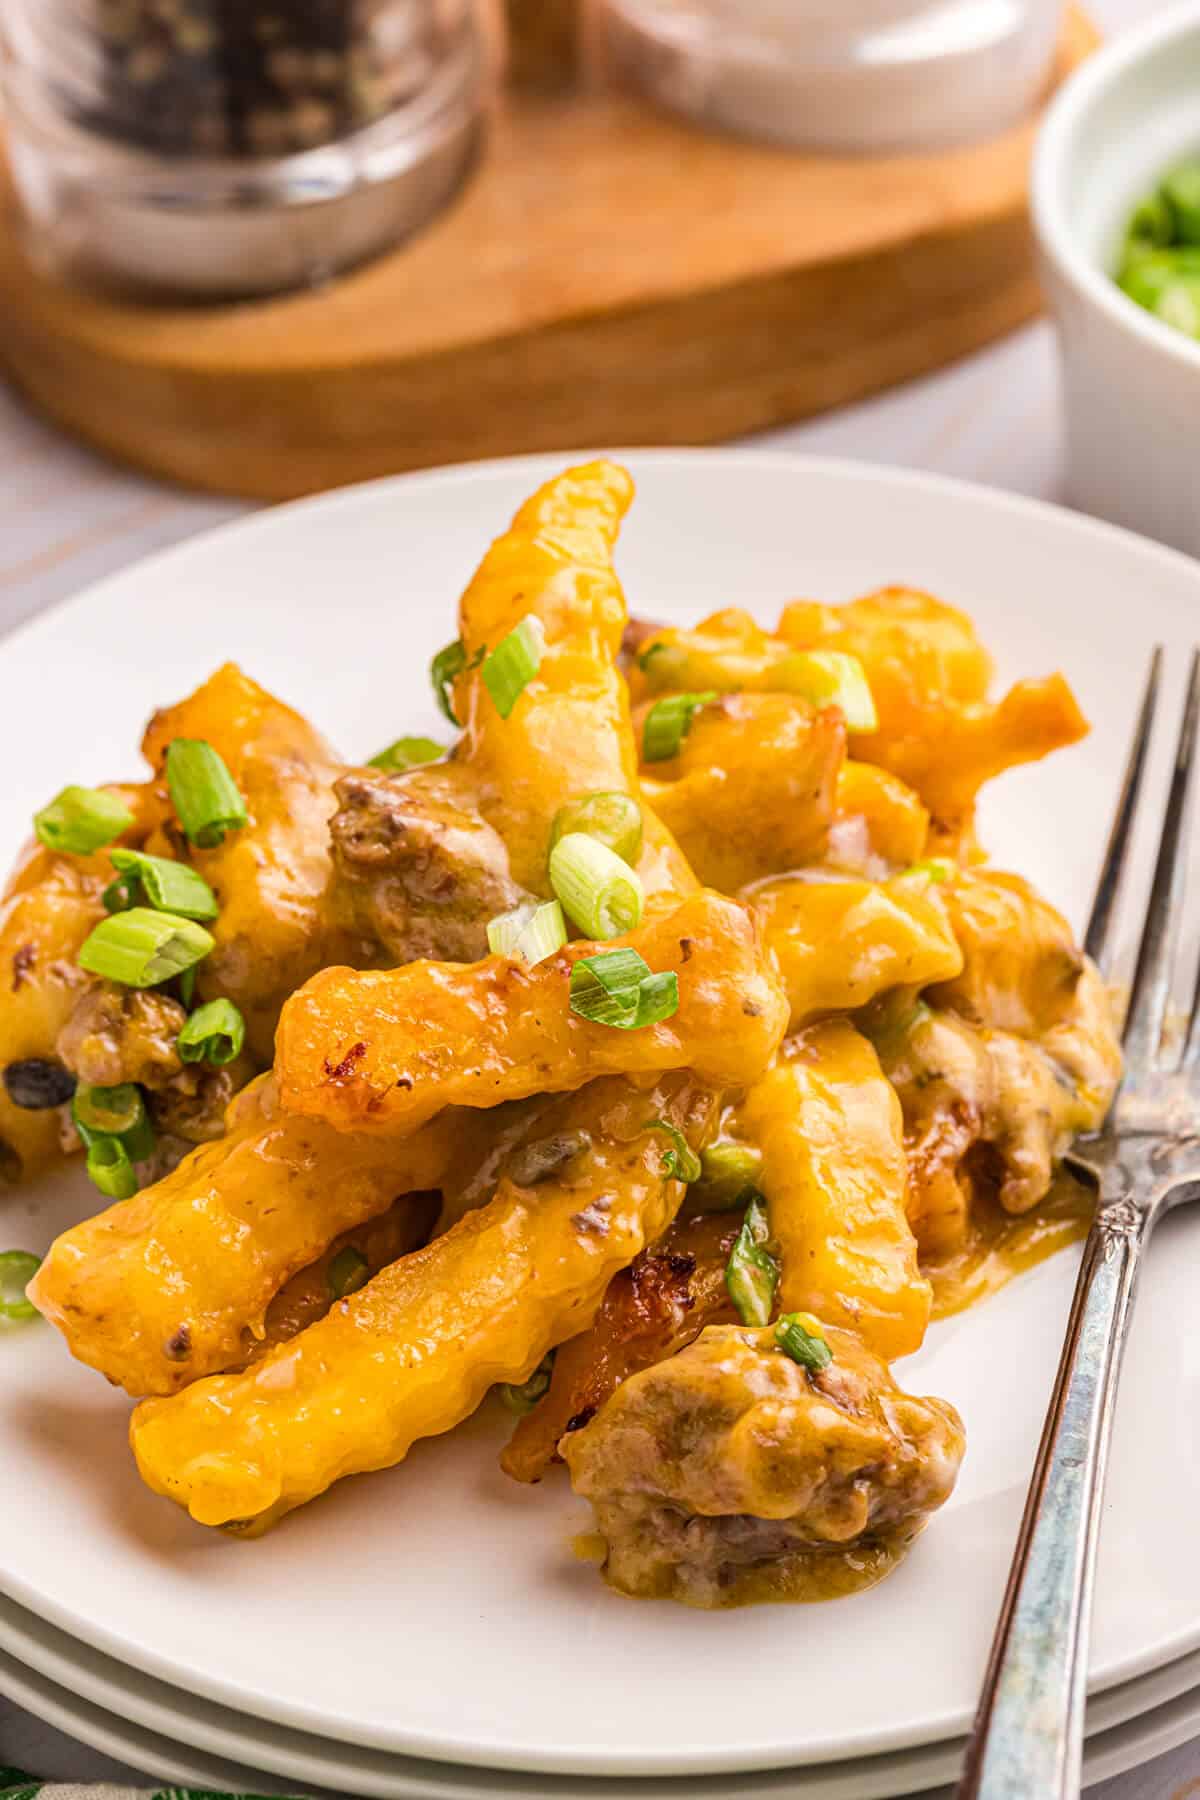 French fry casserole on a plate.